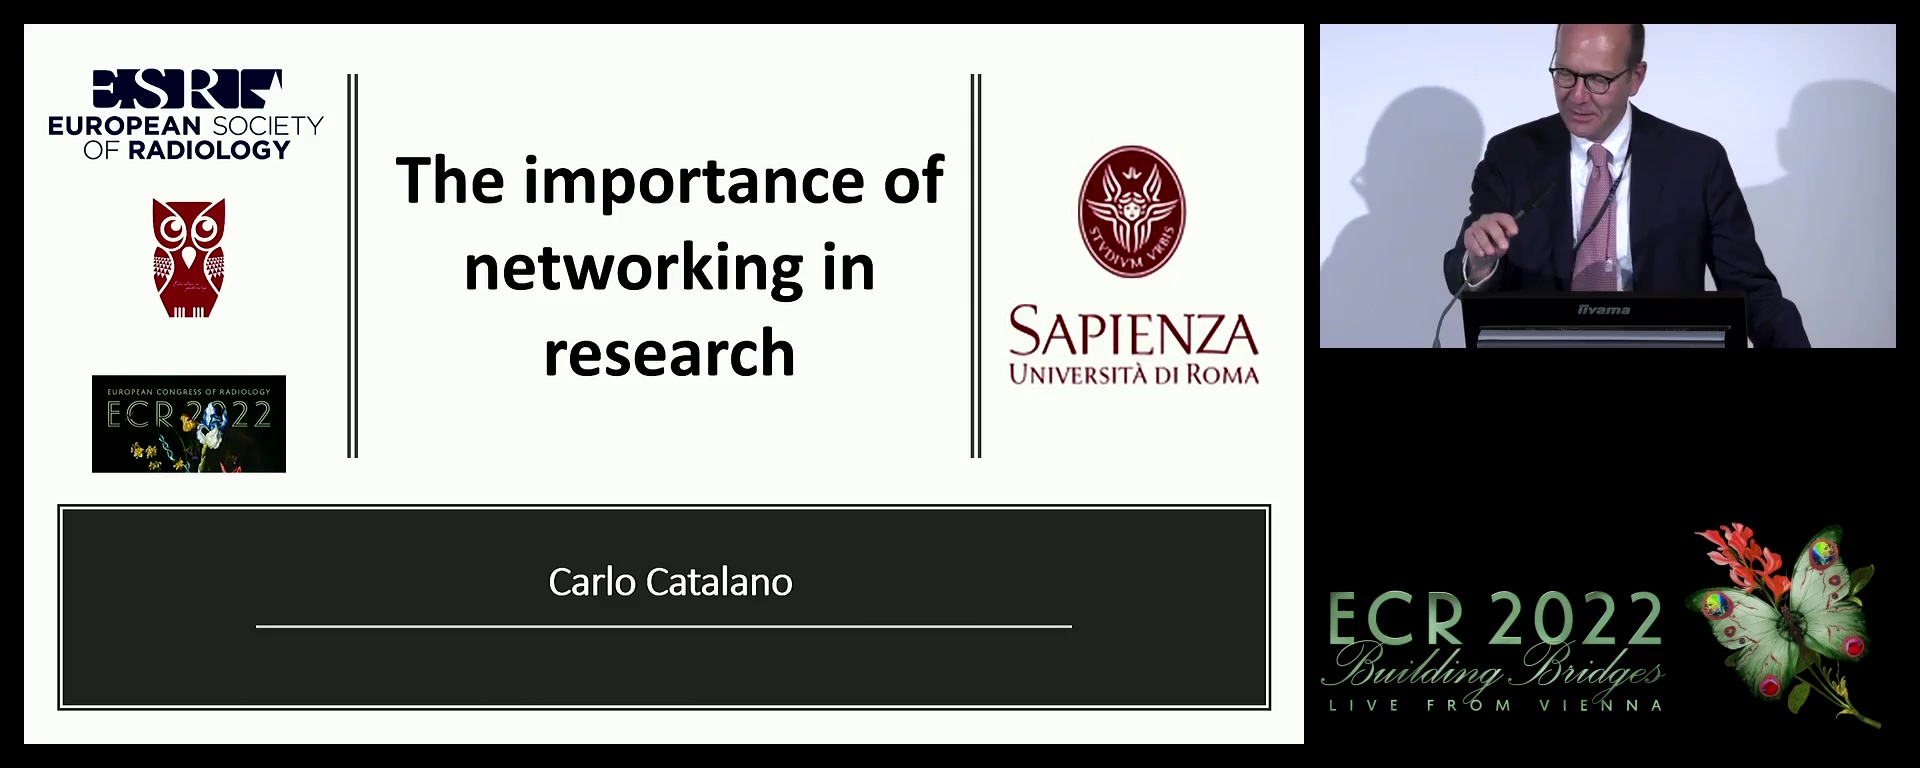 The importance of networking in research - Carlo Catalano, Rome / IT